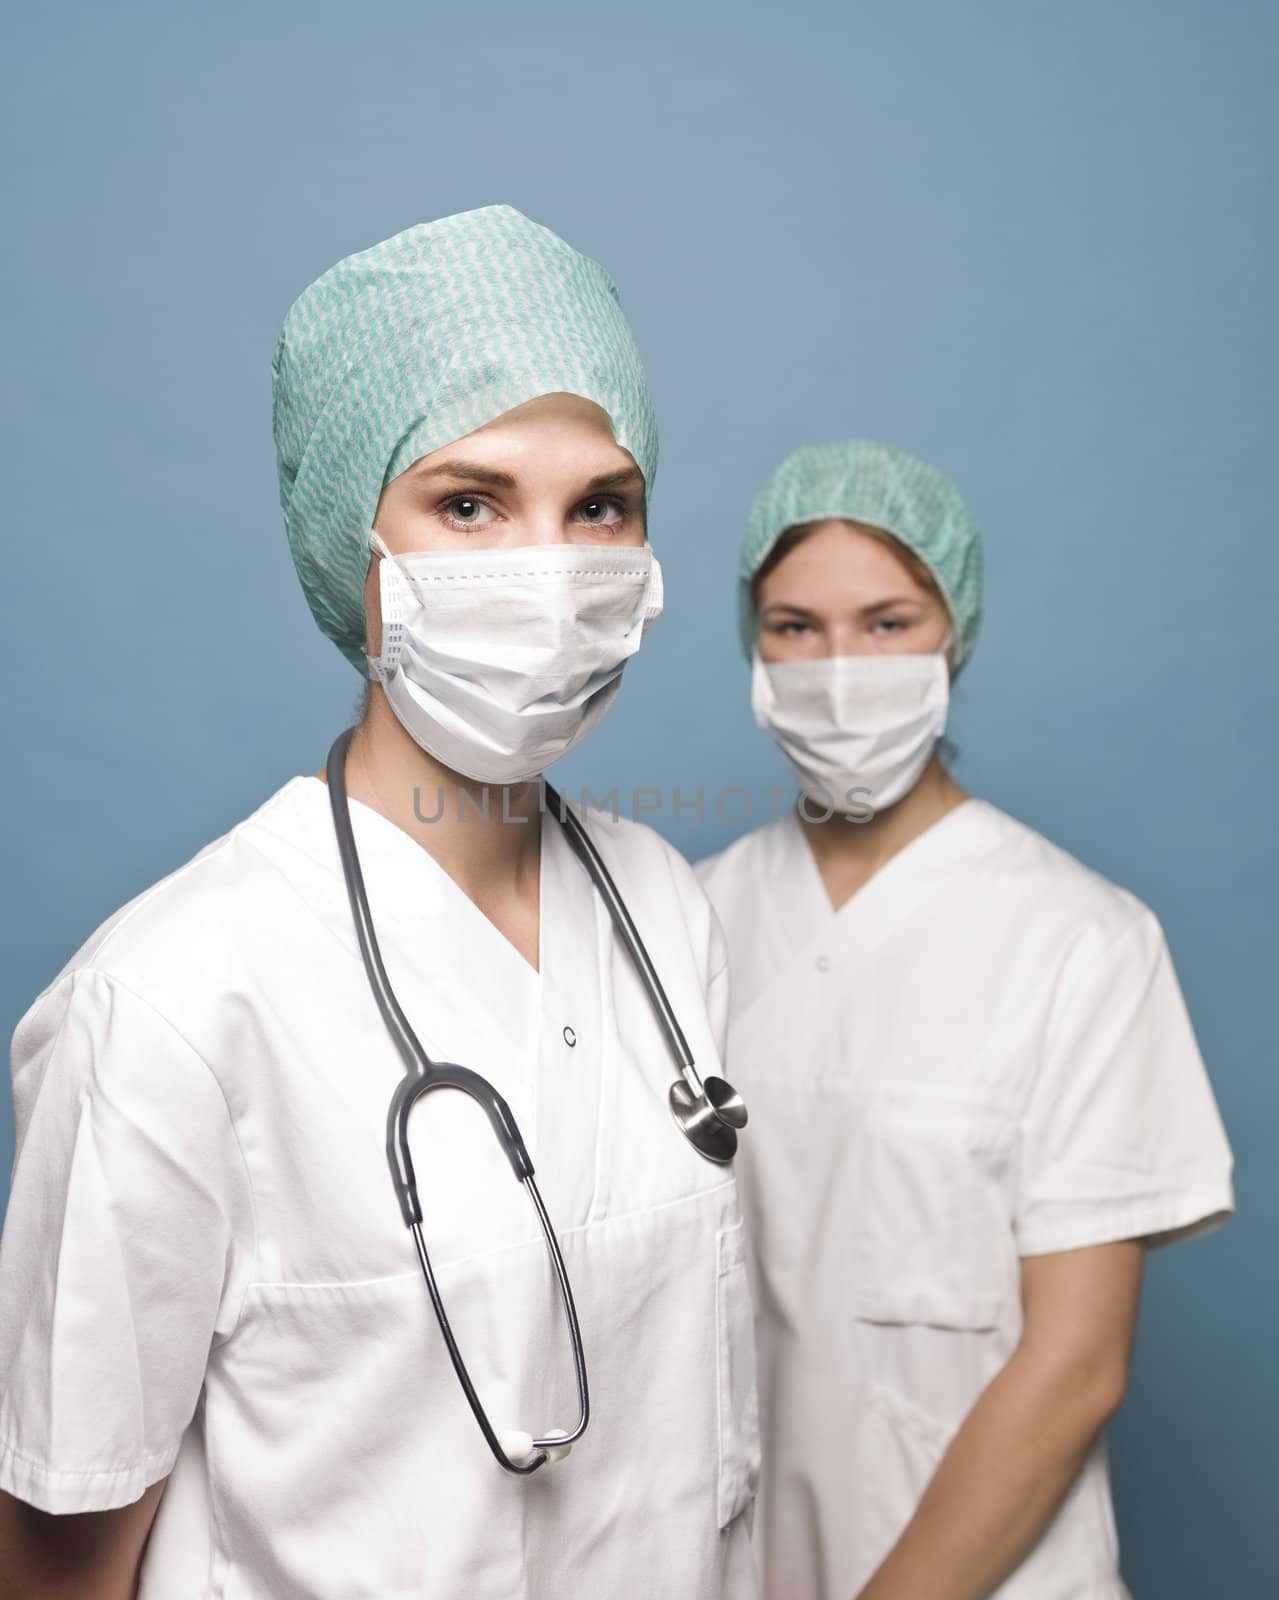 Two nurses with surgical masks and a stethoscope by gemenacom